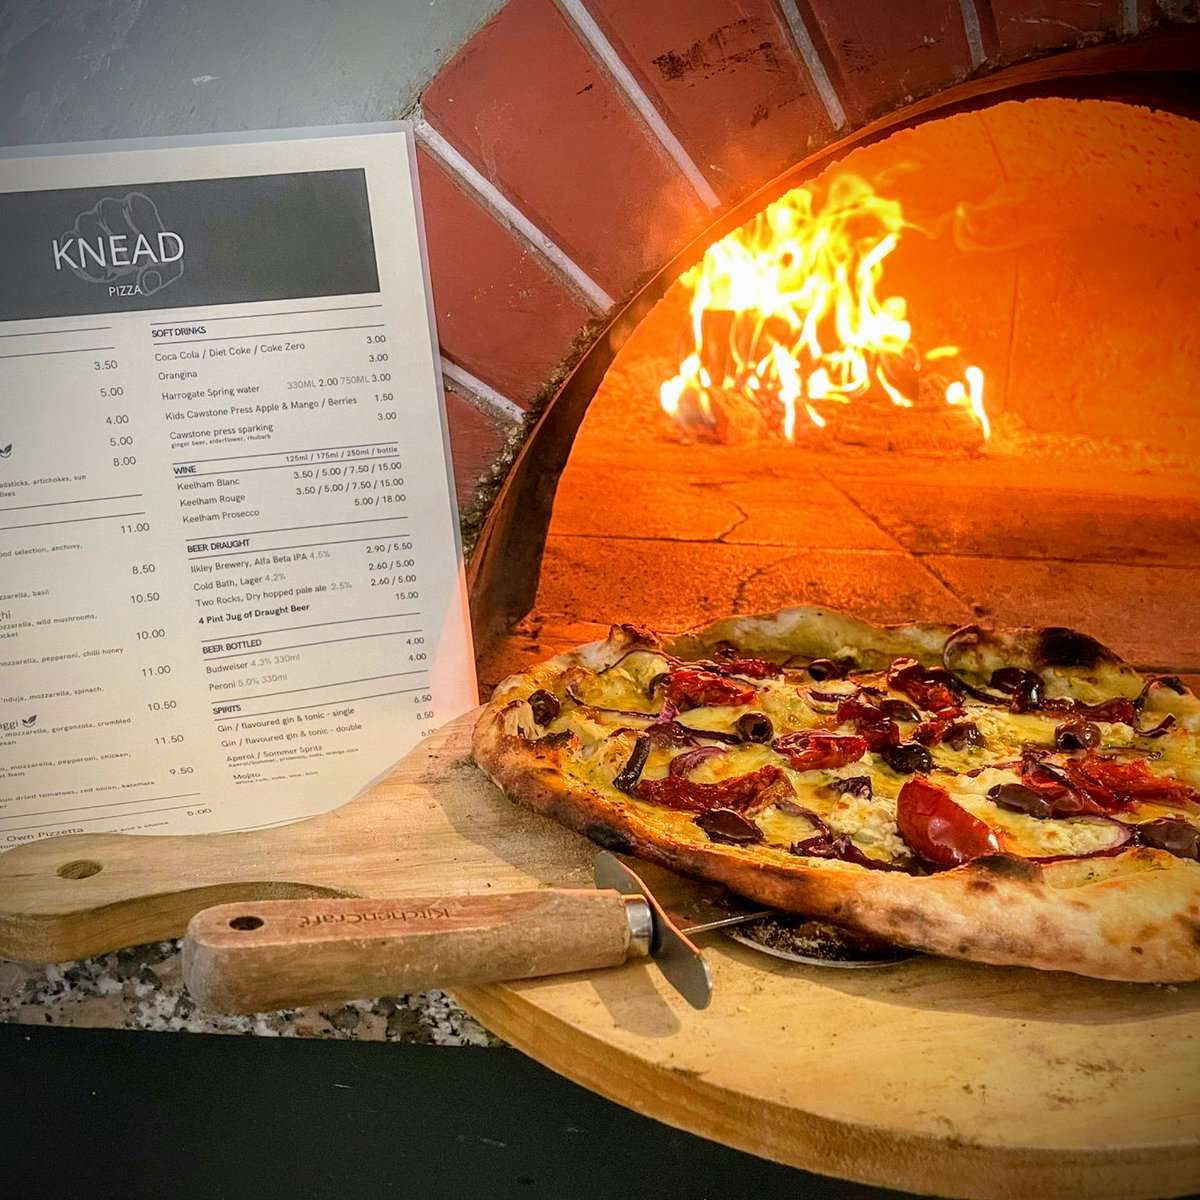 Exciting Times, Our new pizza menu is launched. Come and try our tasty toppings.